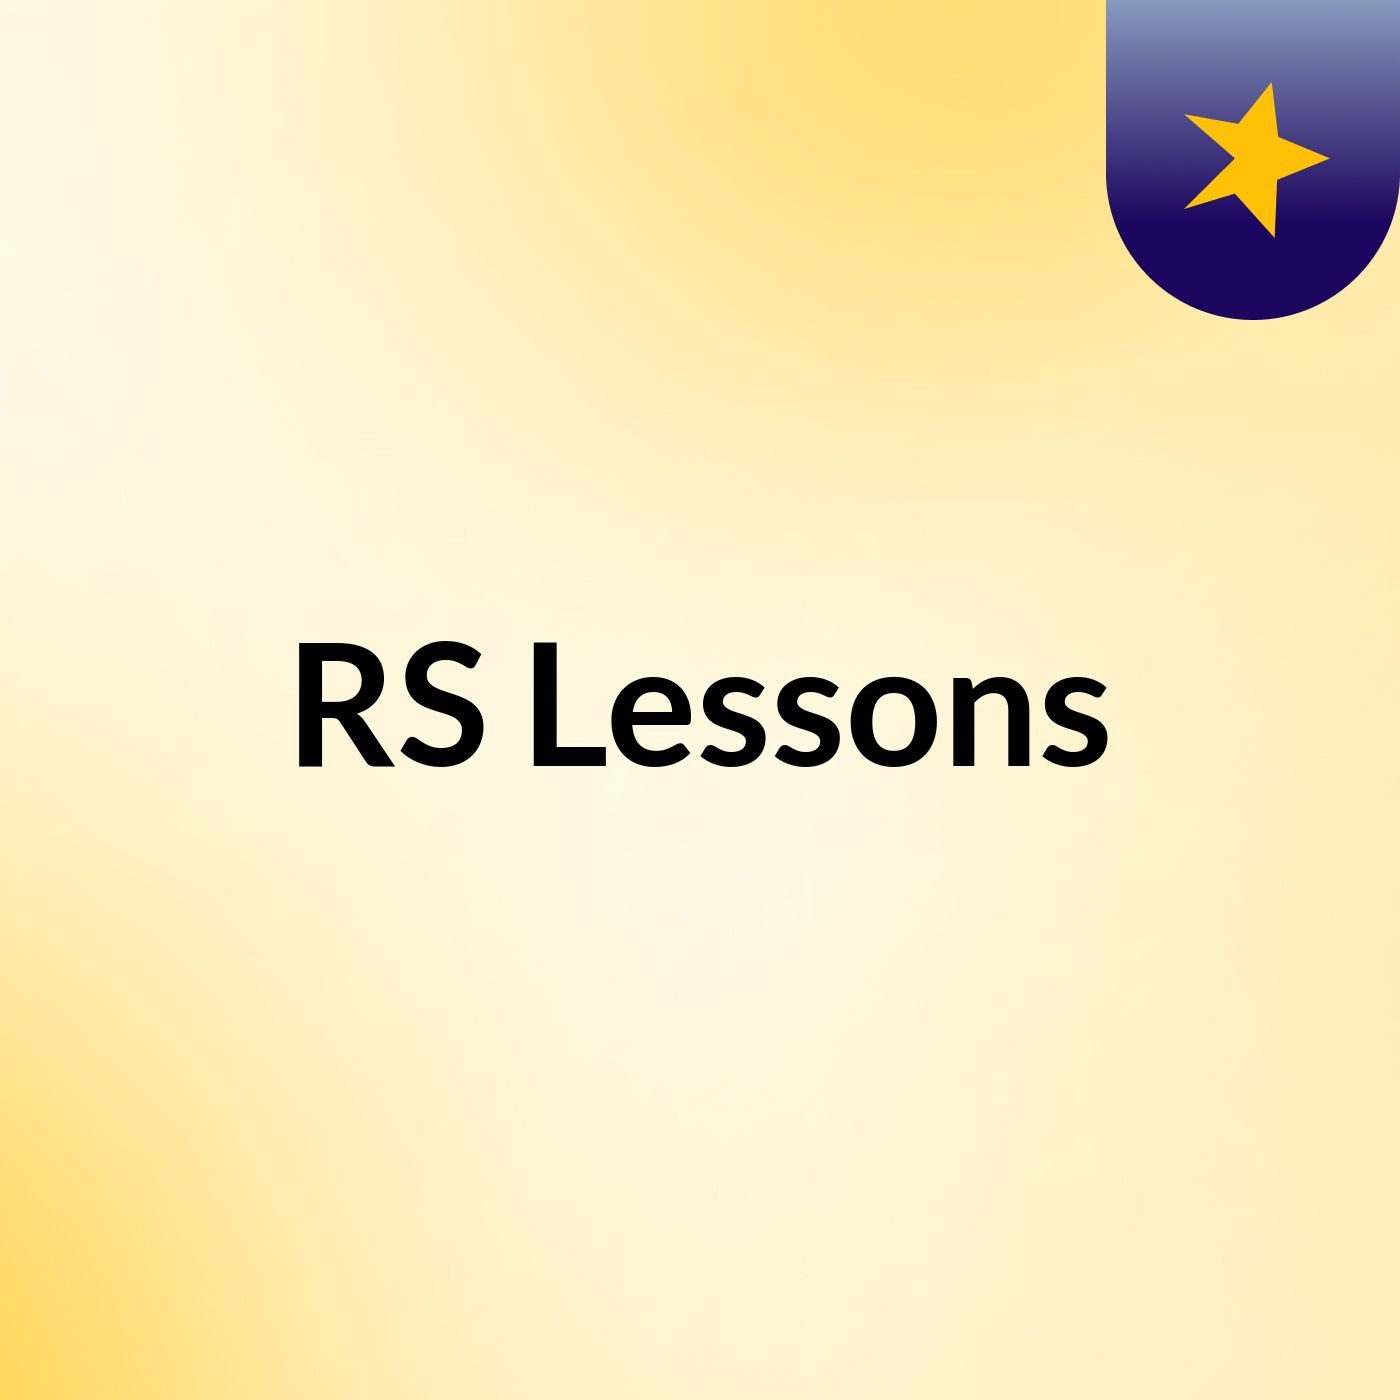 RS Lessons